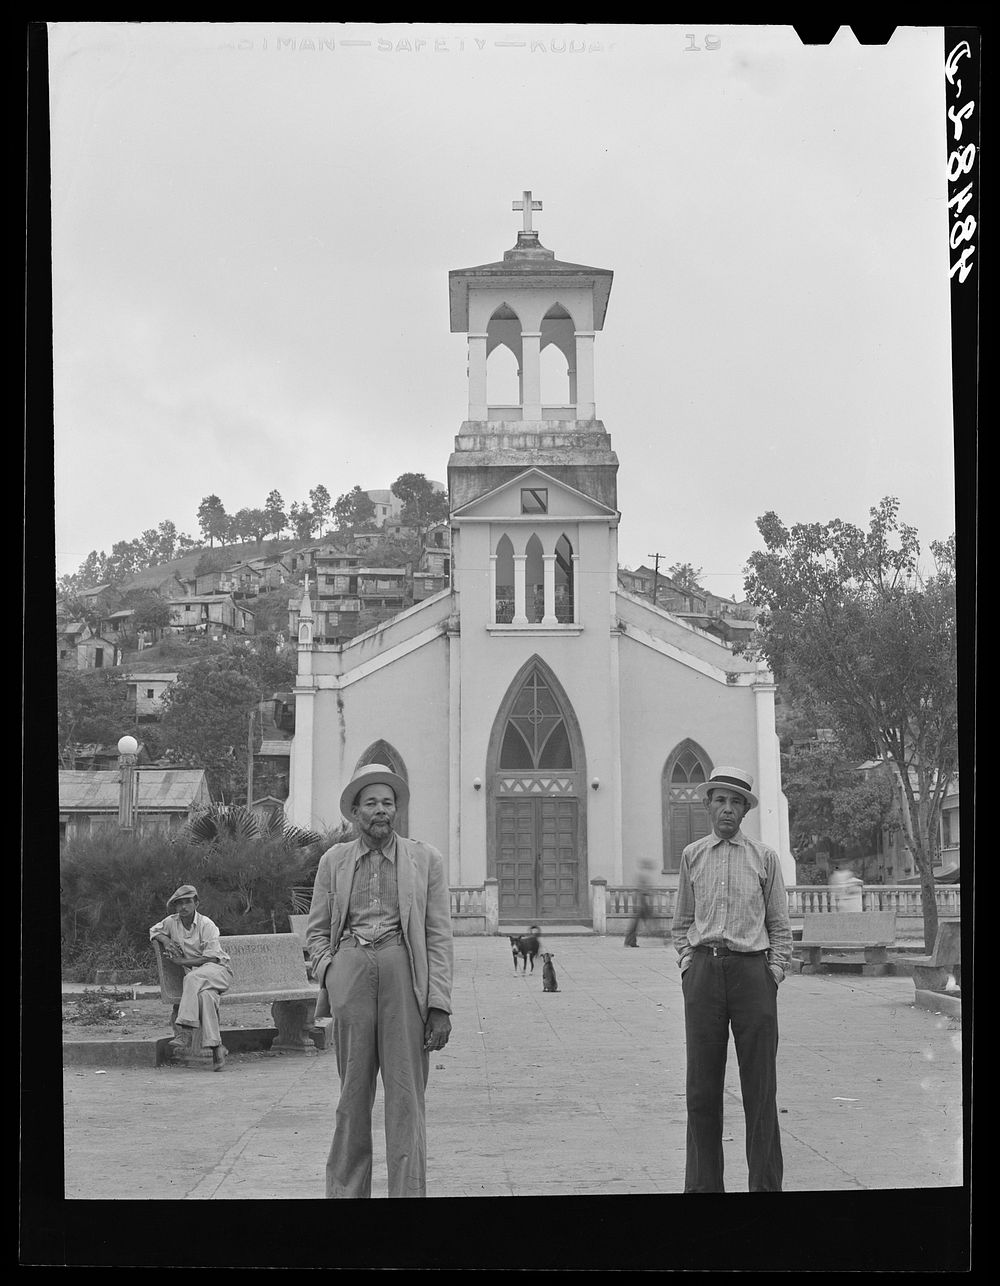 Orocovis, Puerto Rico. The plaza. Sourced from the Library of Congress.